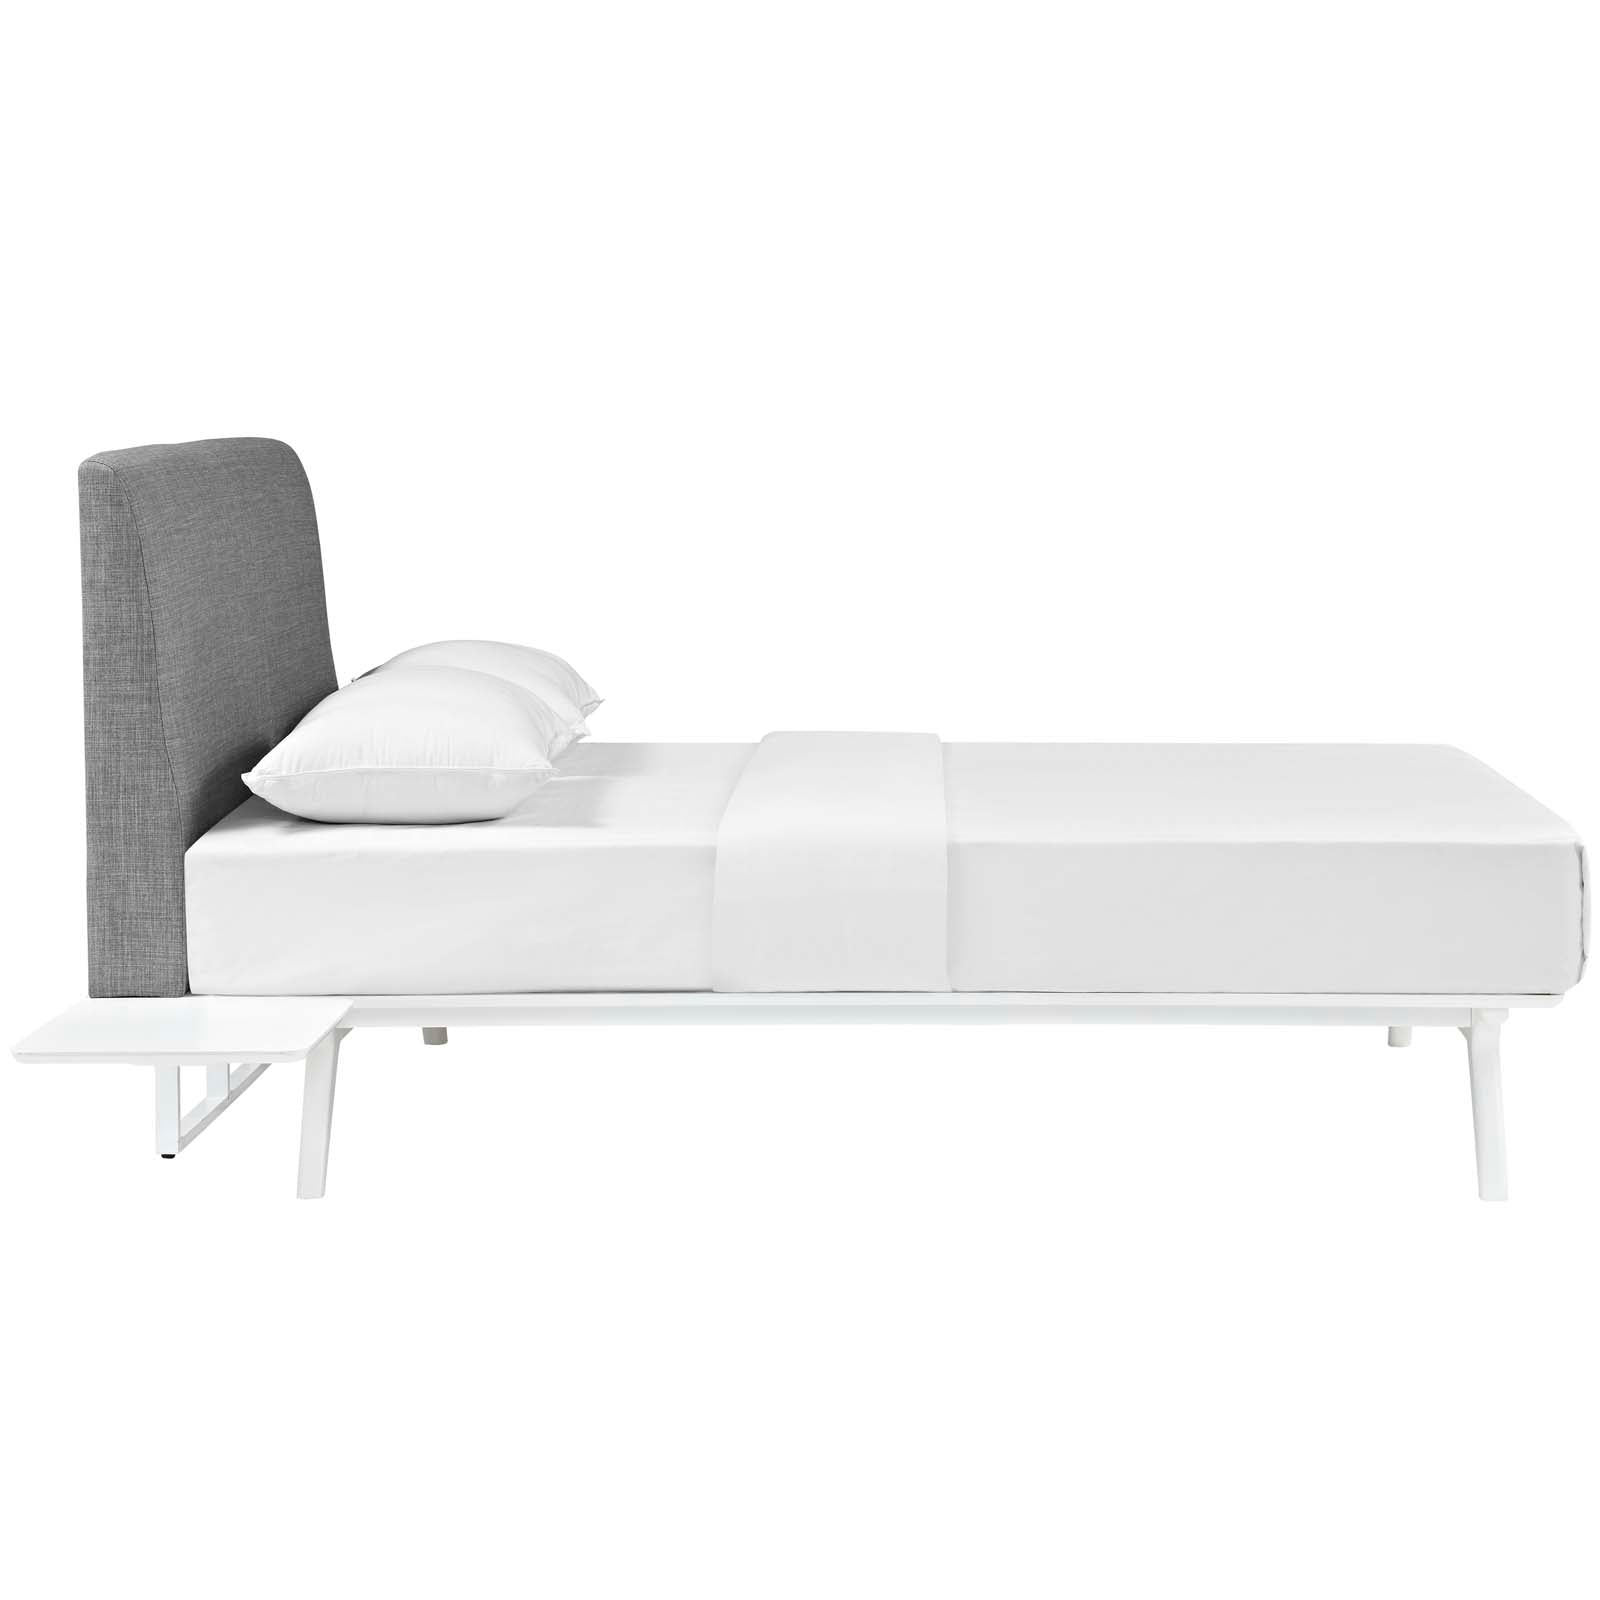 Modway Bedroom Sets - Tracy 3 Piece Full Bedroom Set White Gray